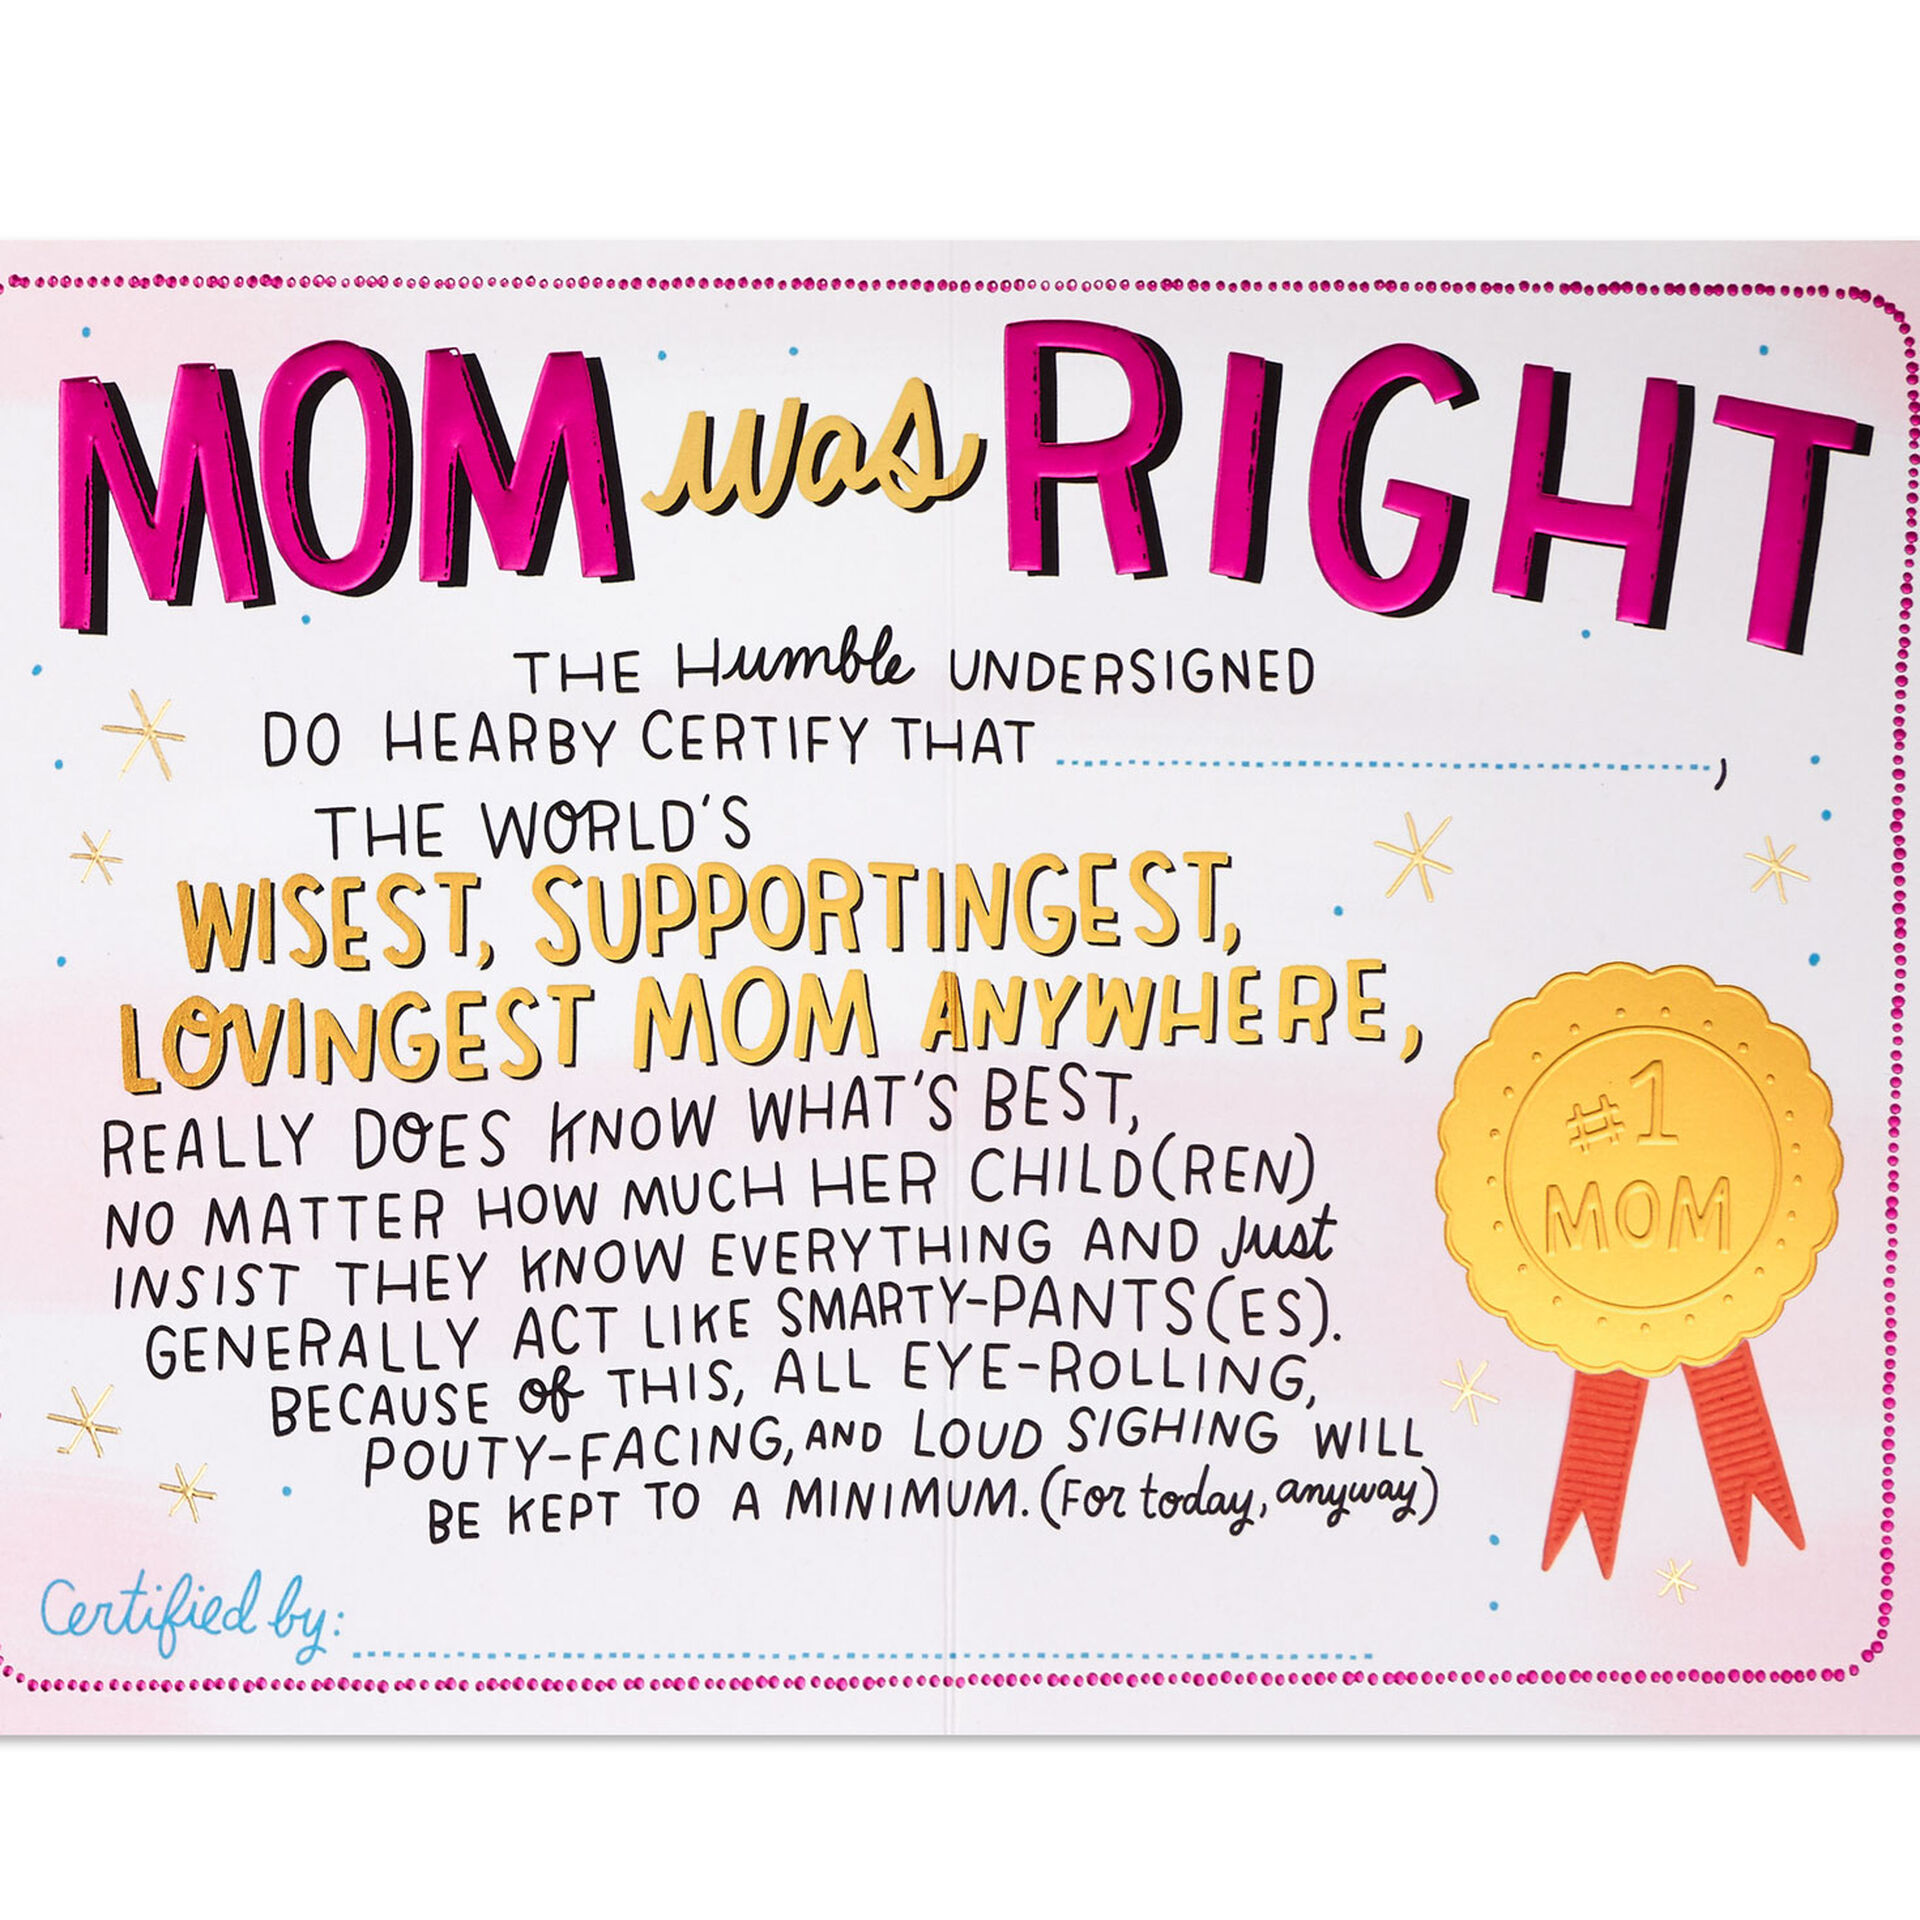 You-Were-Right-Certificate-Funny-Birthday-Card-for-Mom_499FBD4764_02